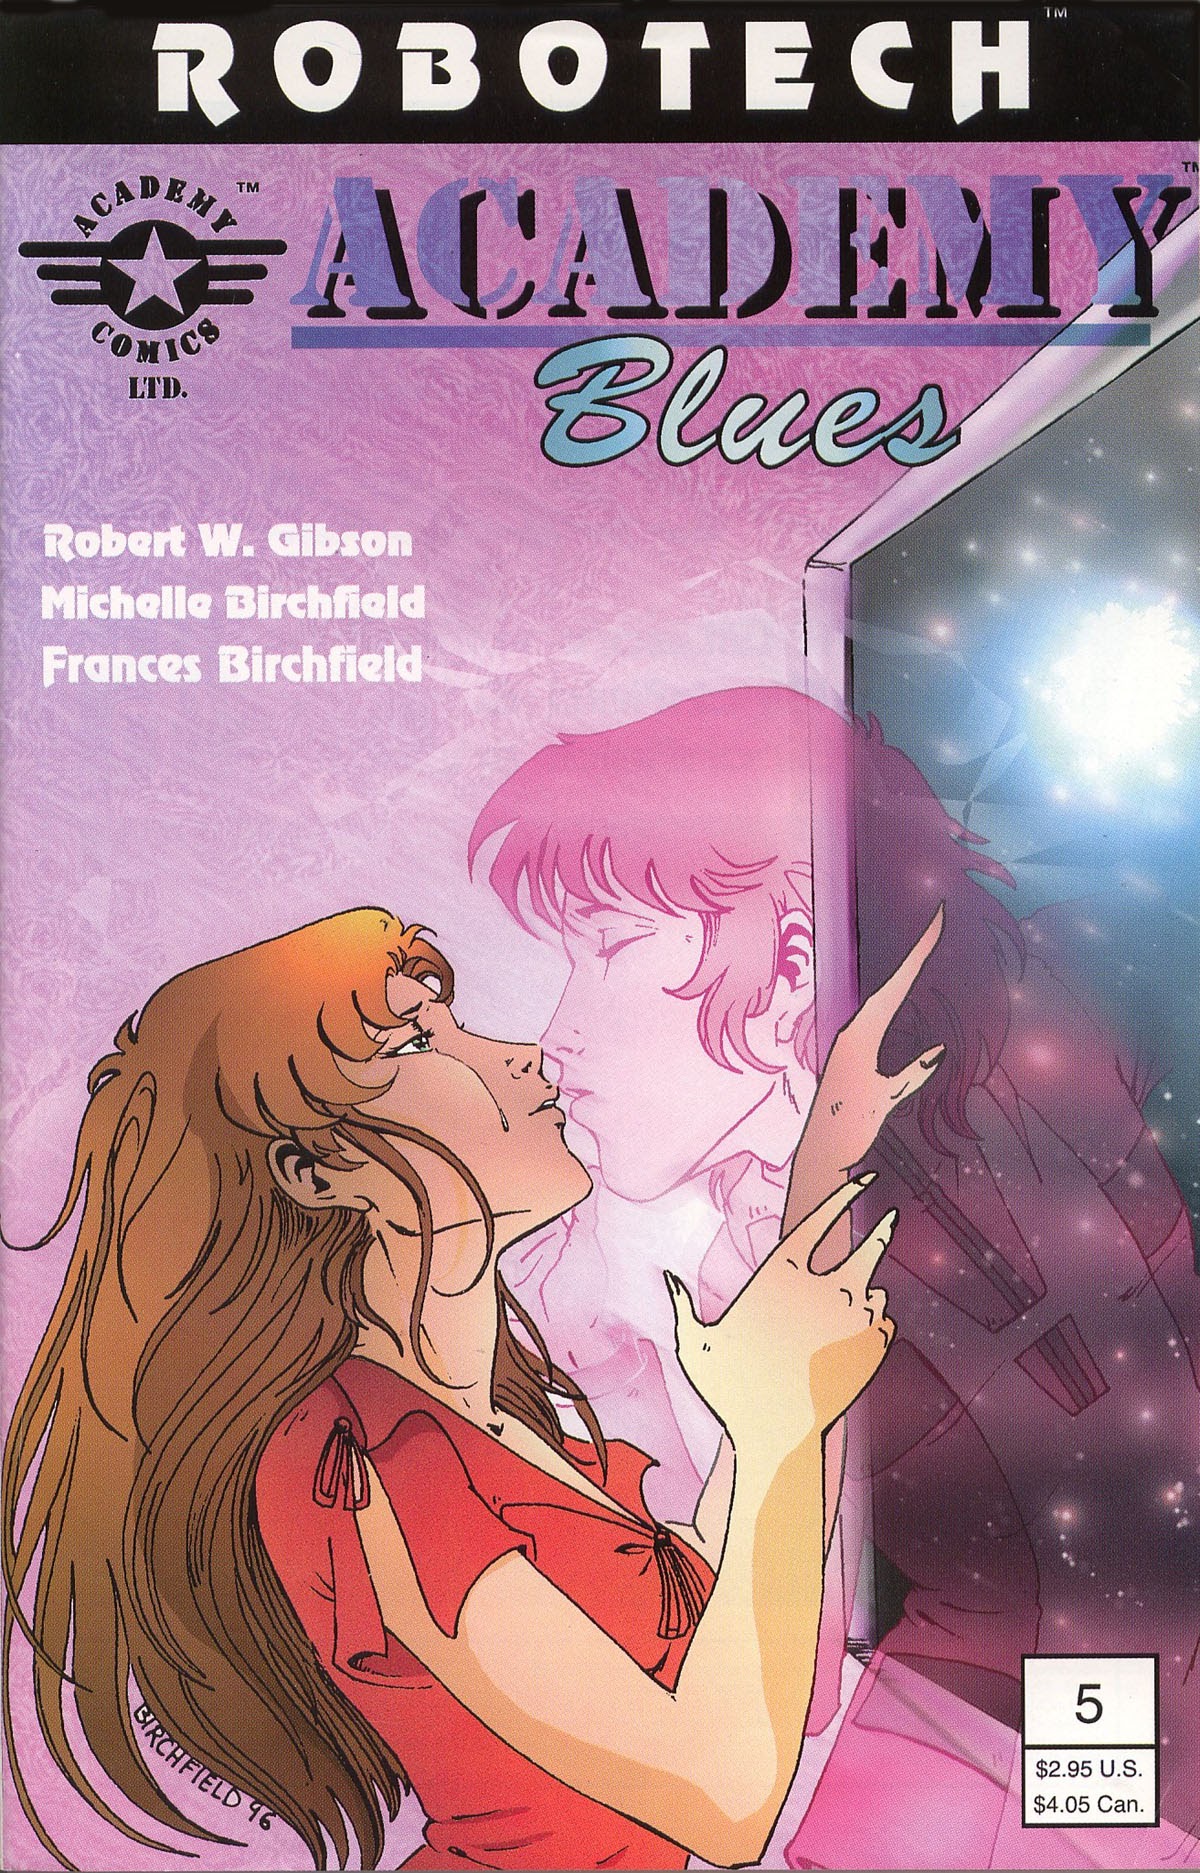 Read online Robotech Academy Blues comic -  Issue #5 - 1